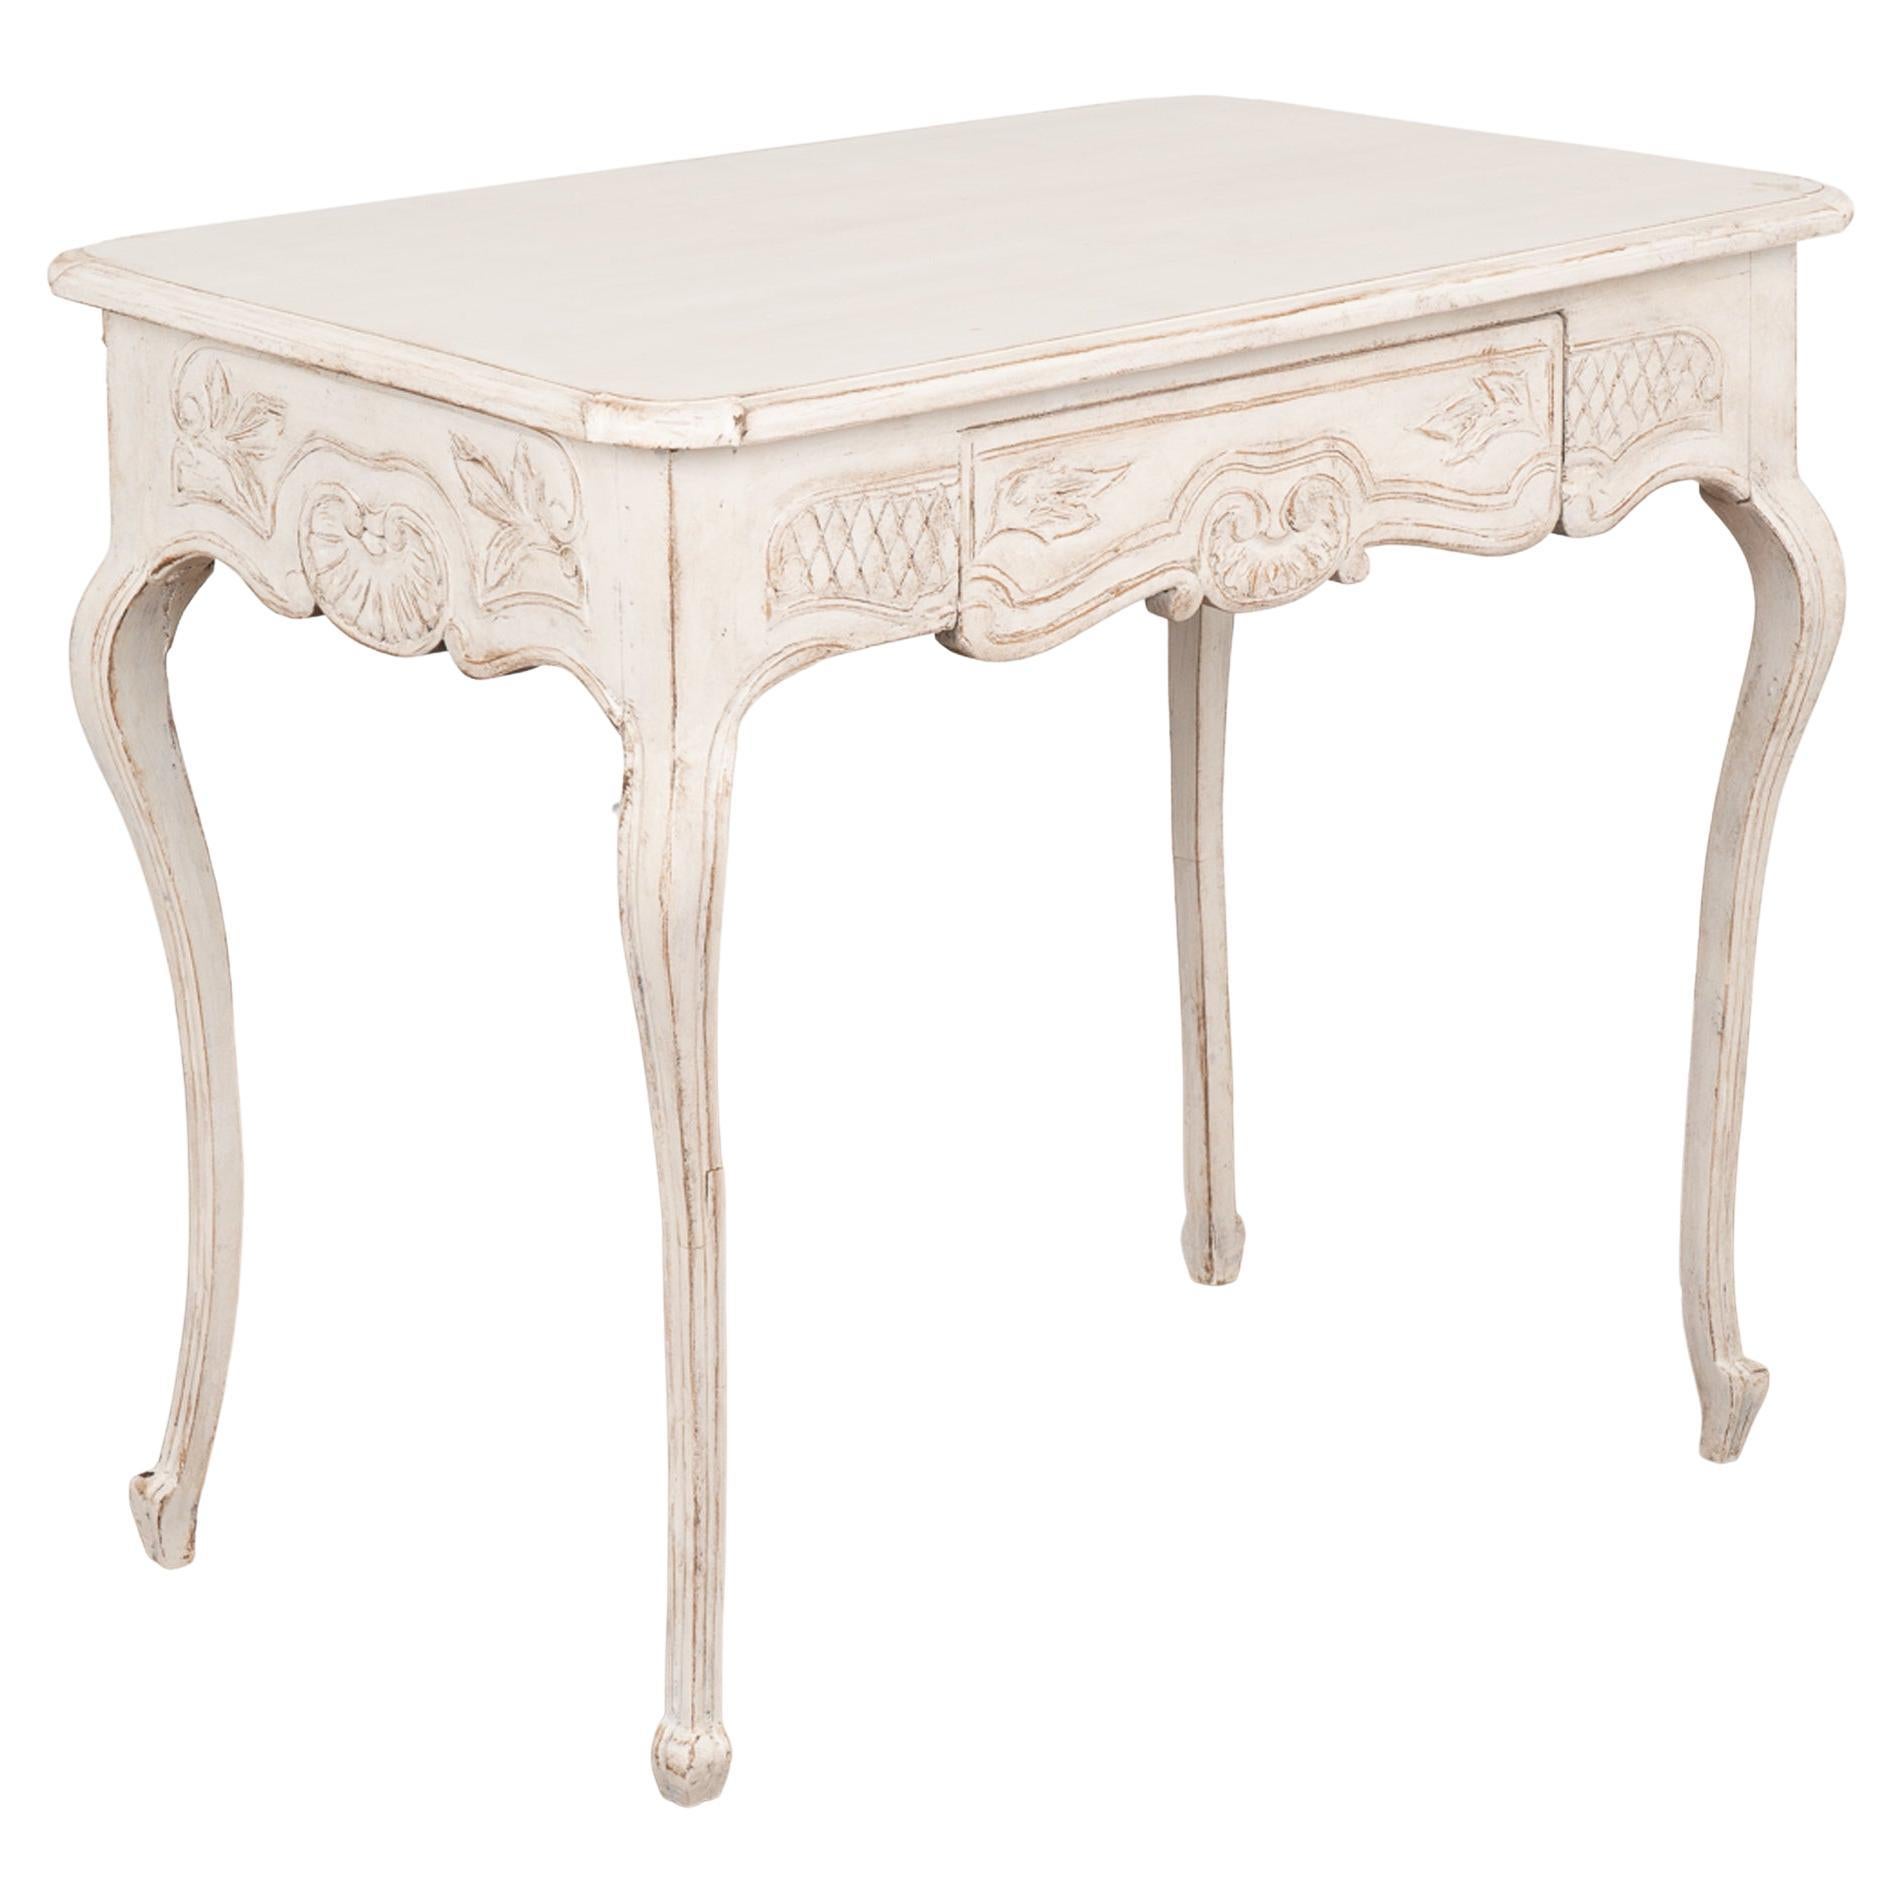 Gustavian White Painted Side Table With Drawer, Sweden circa 1820-40 For Sale